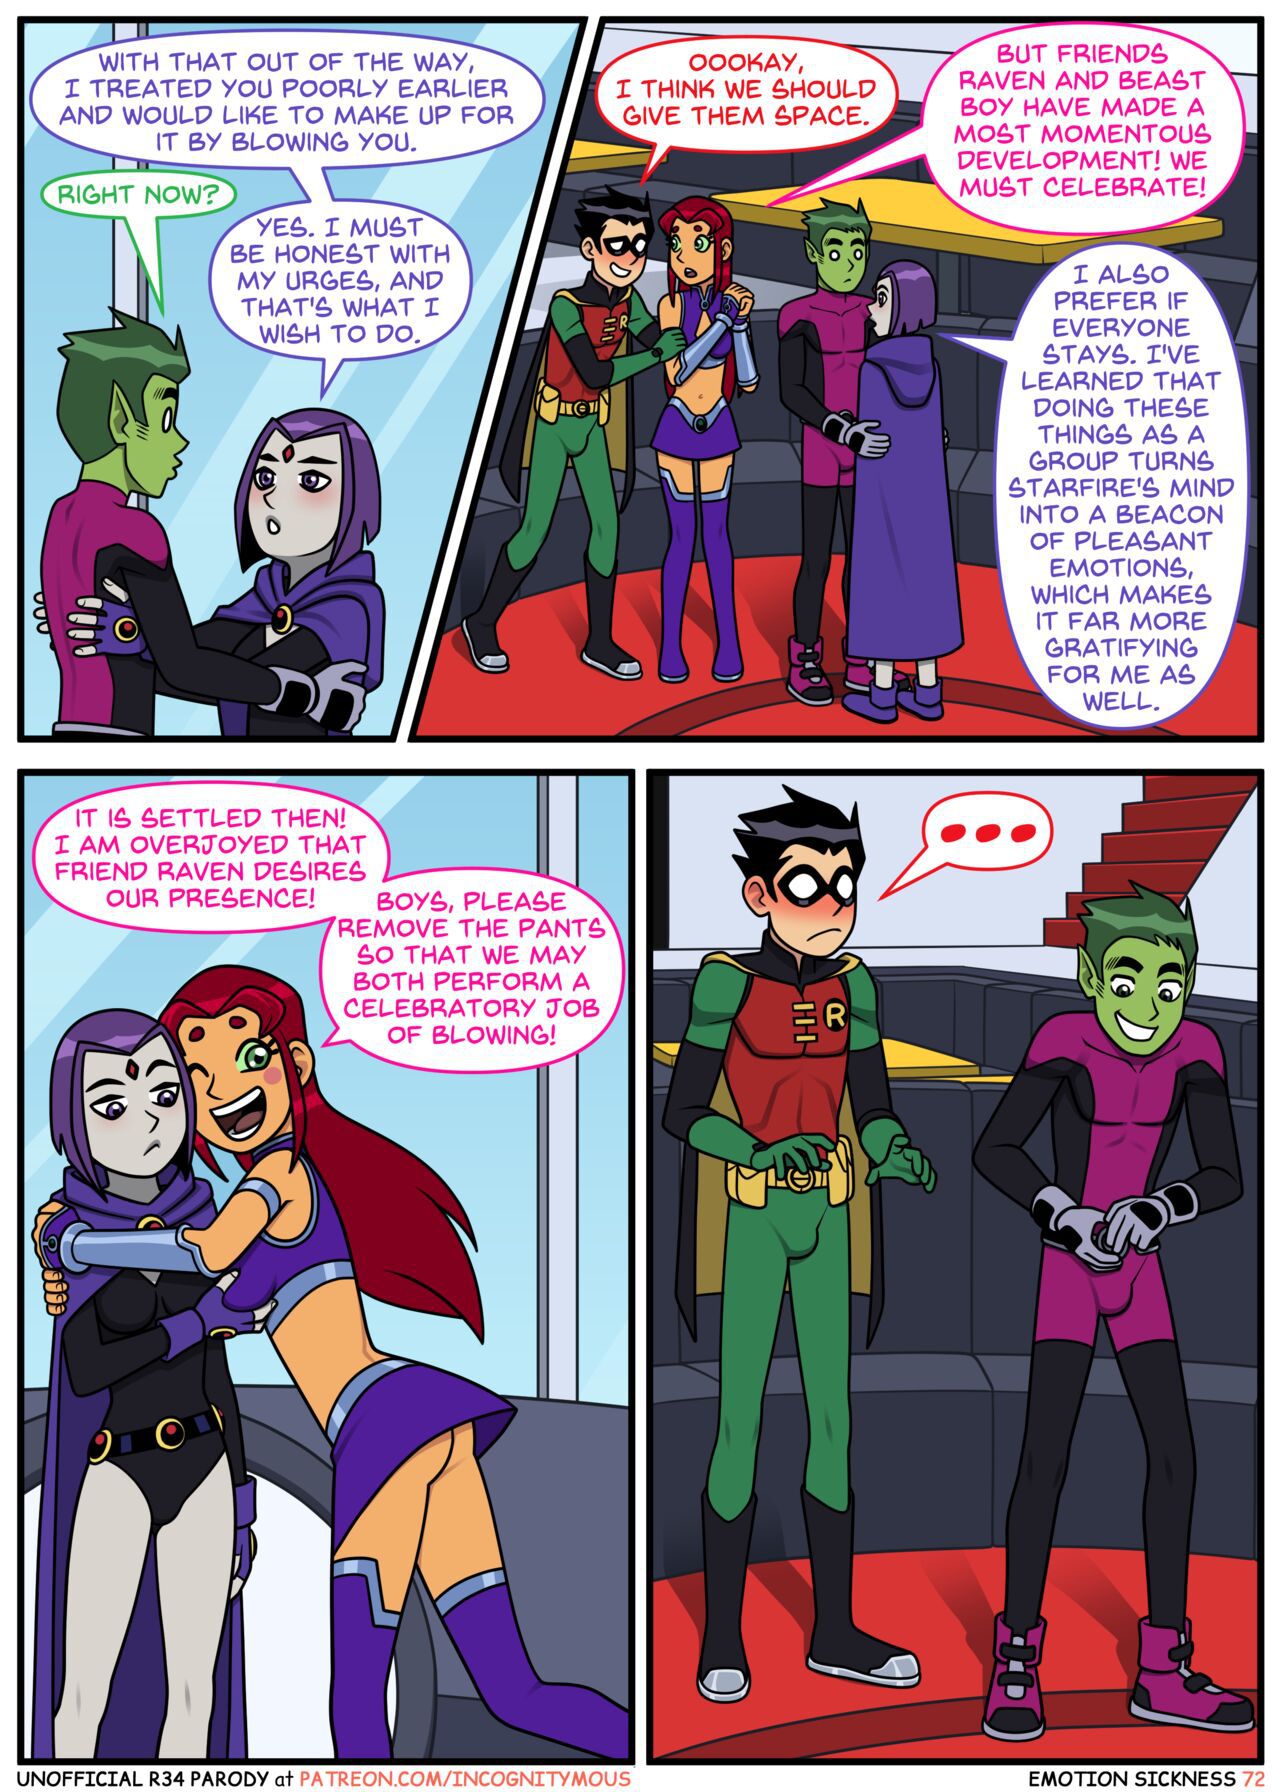 [Incognitymous] Emotion Sickness (Teen Titans) [Ongoing] 69